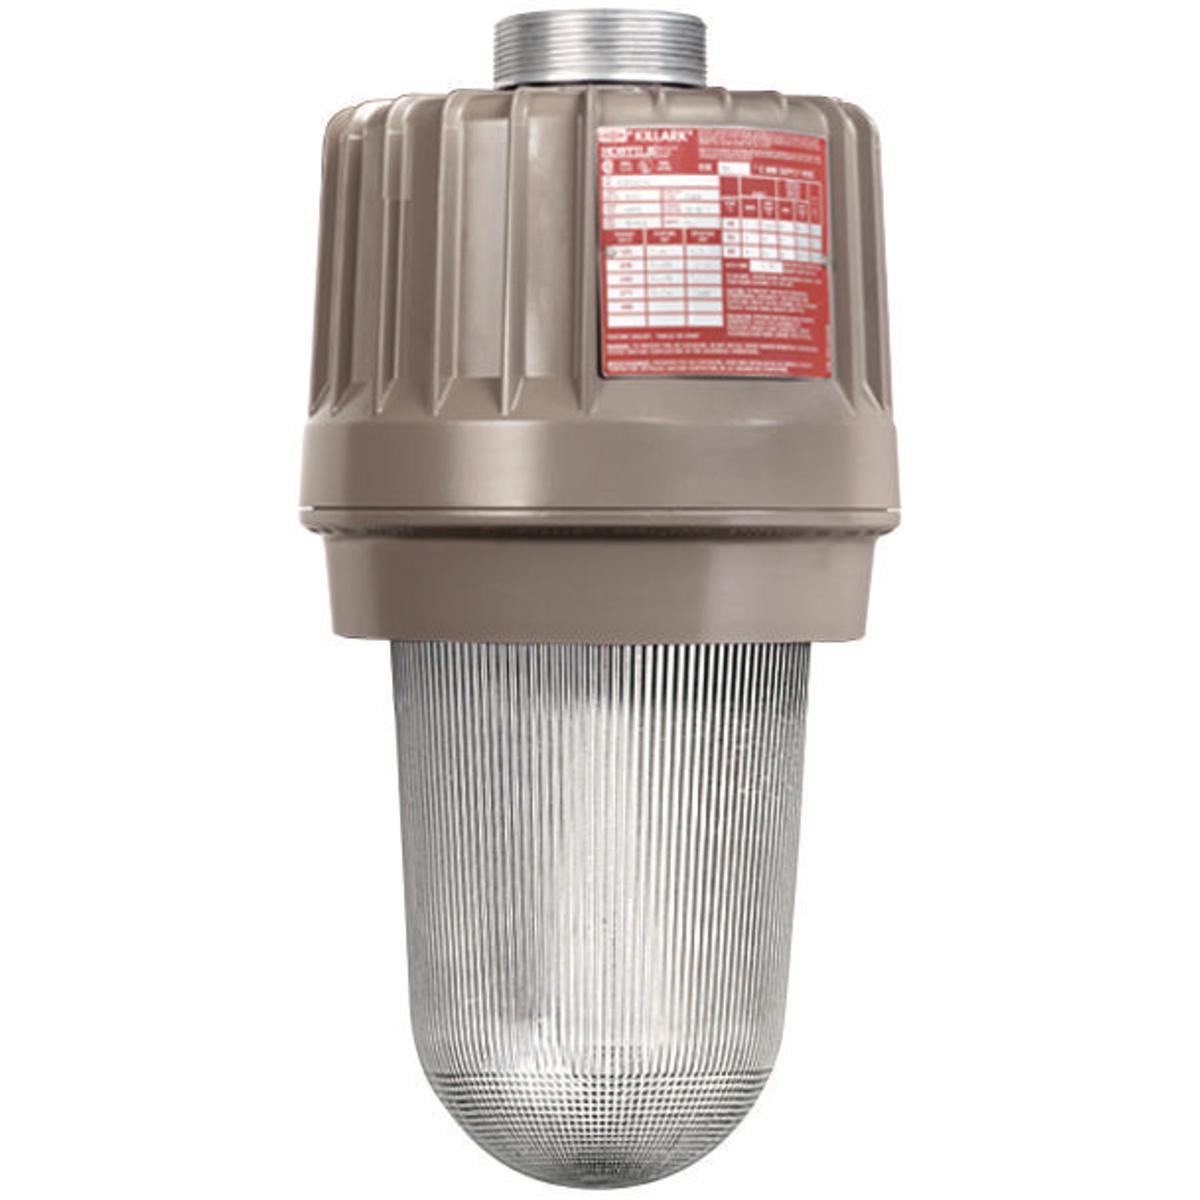 Hubbell EZS250 CEN Class I 250W Quadri-Volt High Pressure Sodium, ATEX Rated  ; Three light sources – High Pressure Sodium (50-400W), Metal Halide (70-400W) and Pulse Start Metal Halide (175-400W) ; Mounting choice –Pendant, ceiling, 25˚ stanchion or 90˚ wall mount, all wit